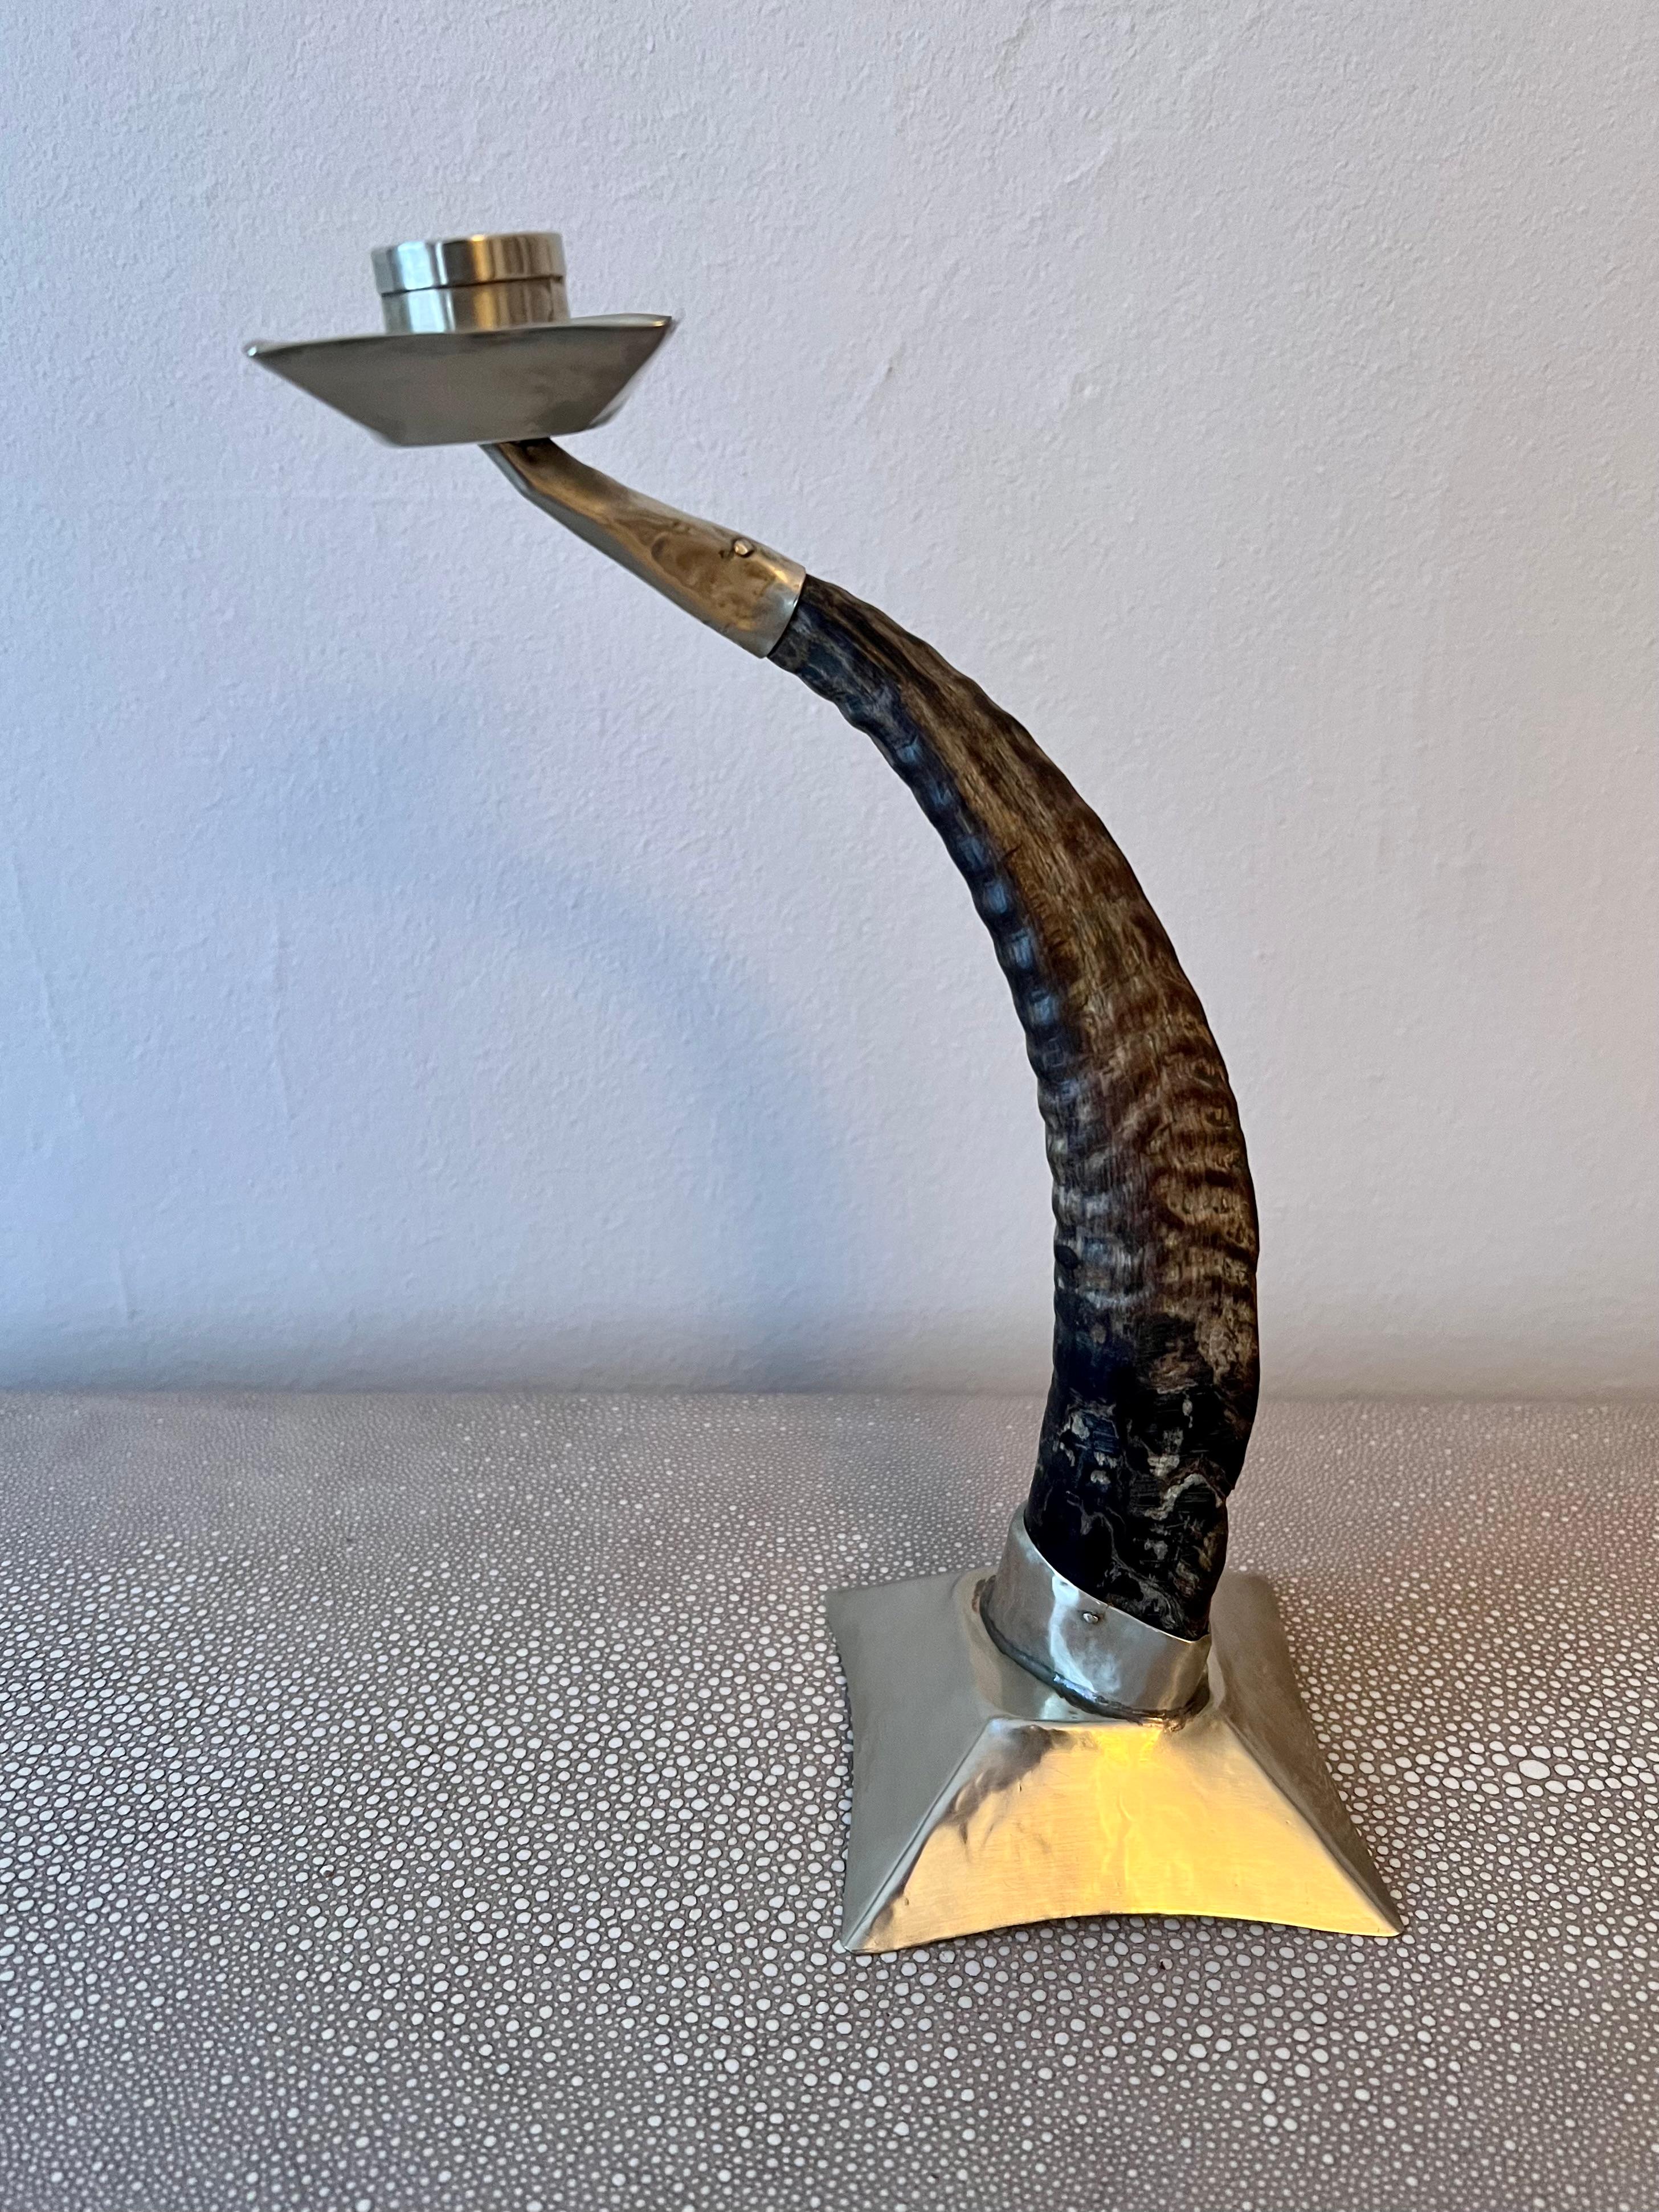 Candle stick holder made of ram's horn with silver base and candle cup. This is a vintage piece with good character and holds a standard size taper candle with style and ease.